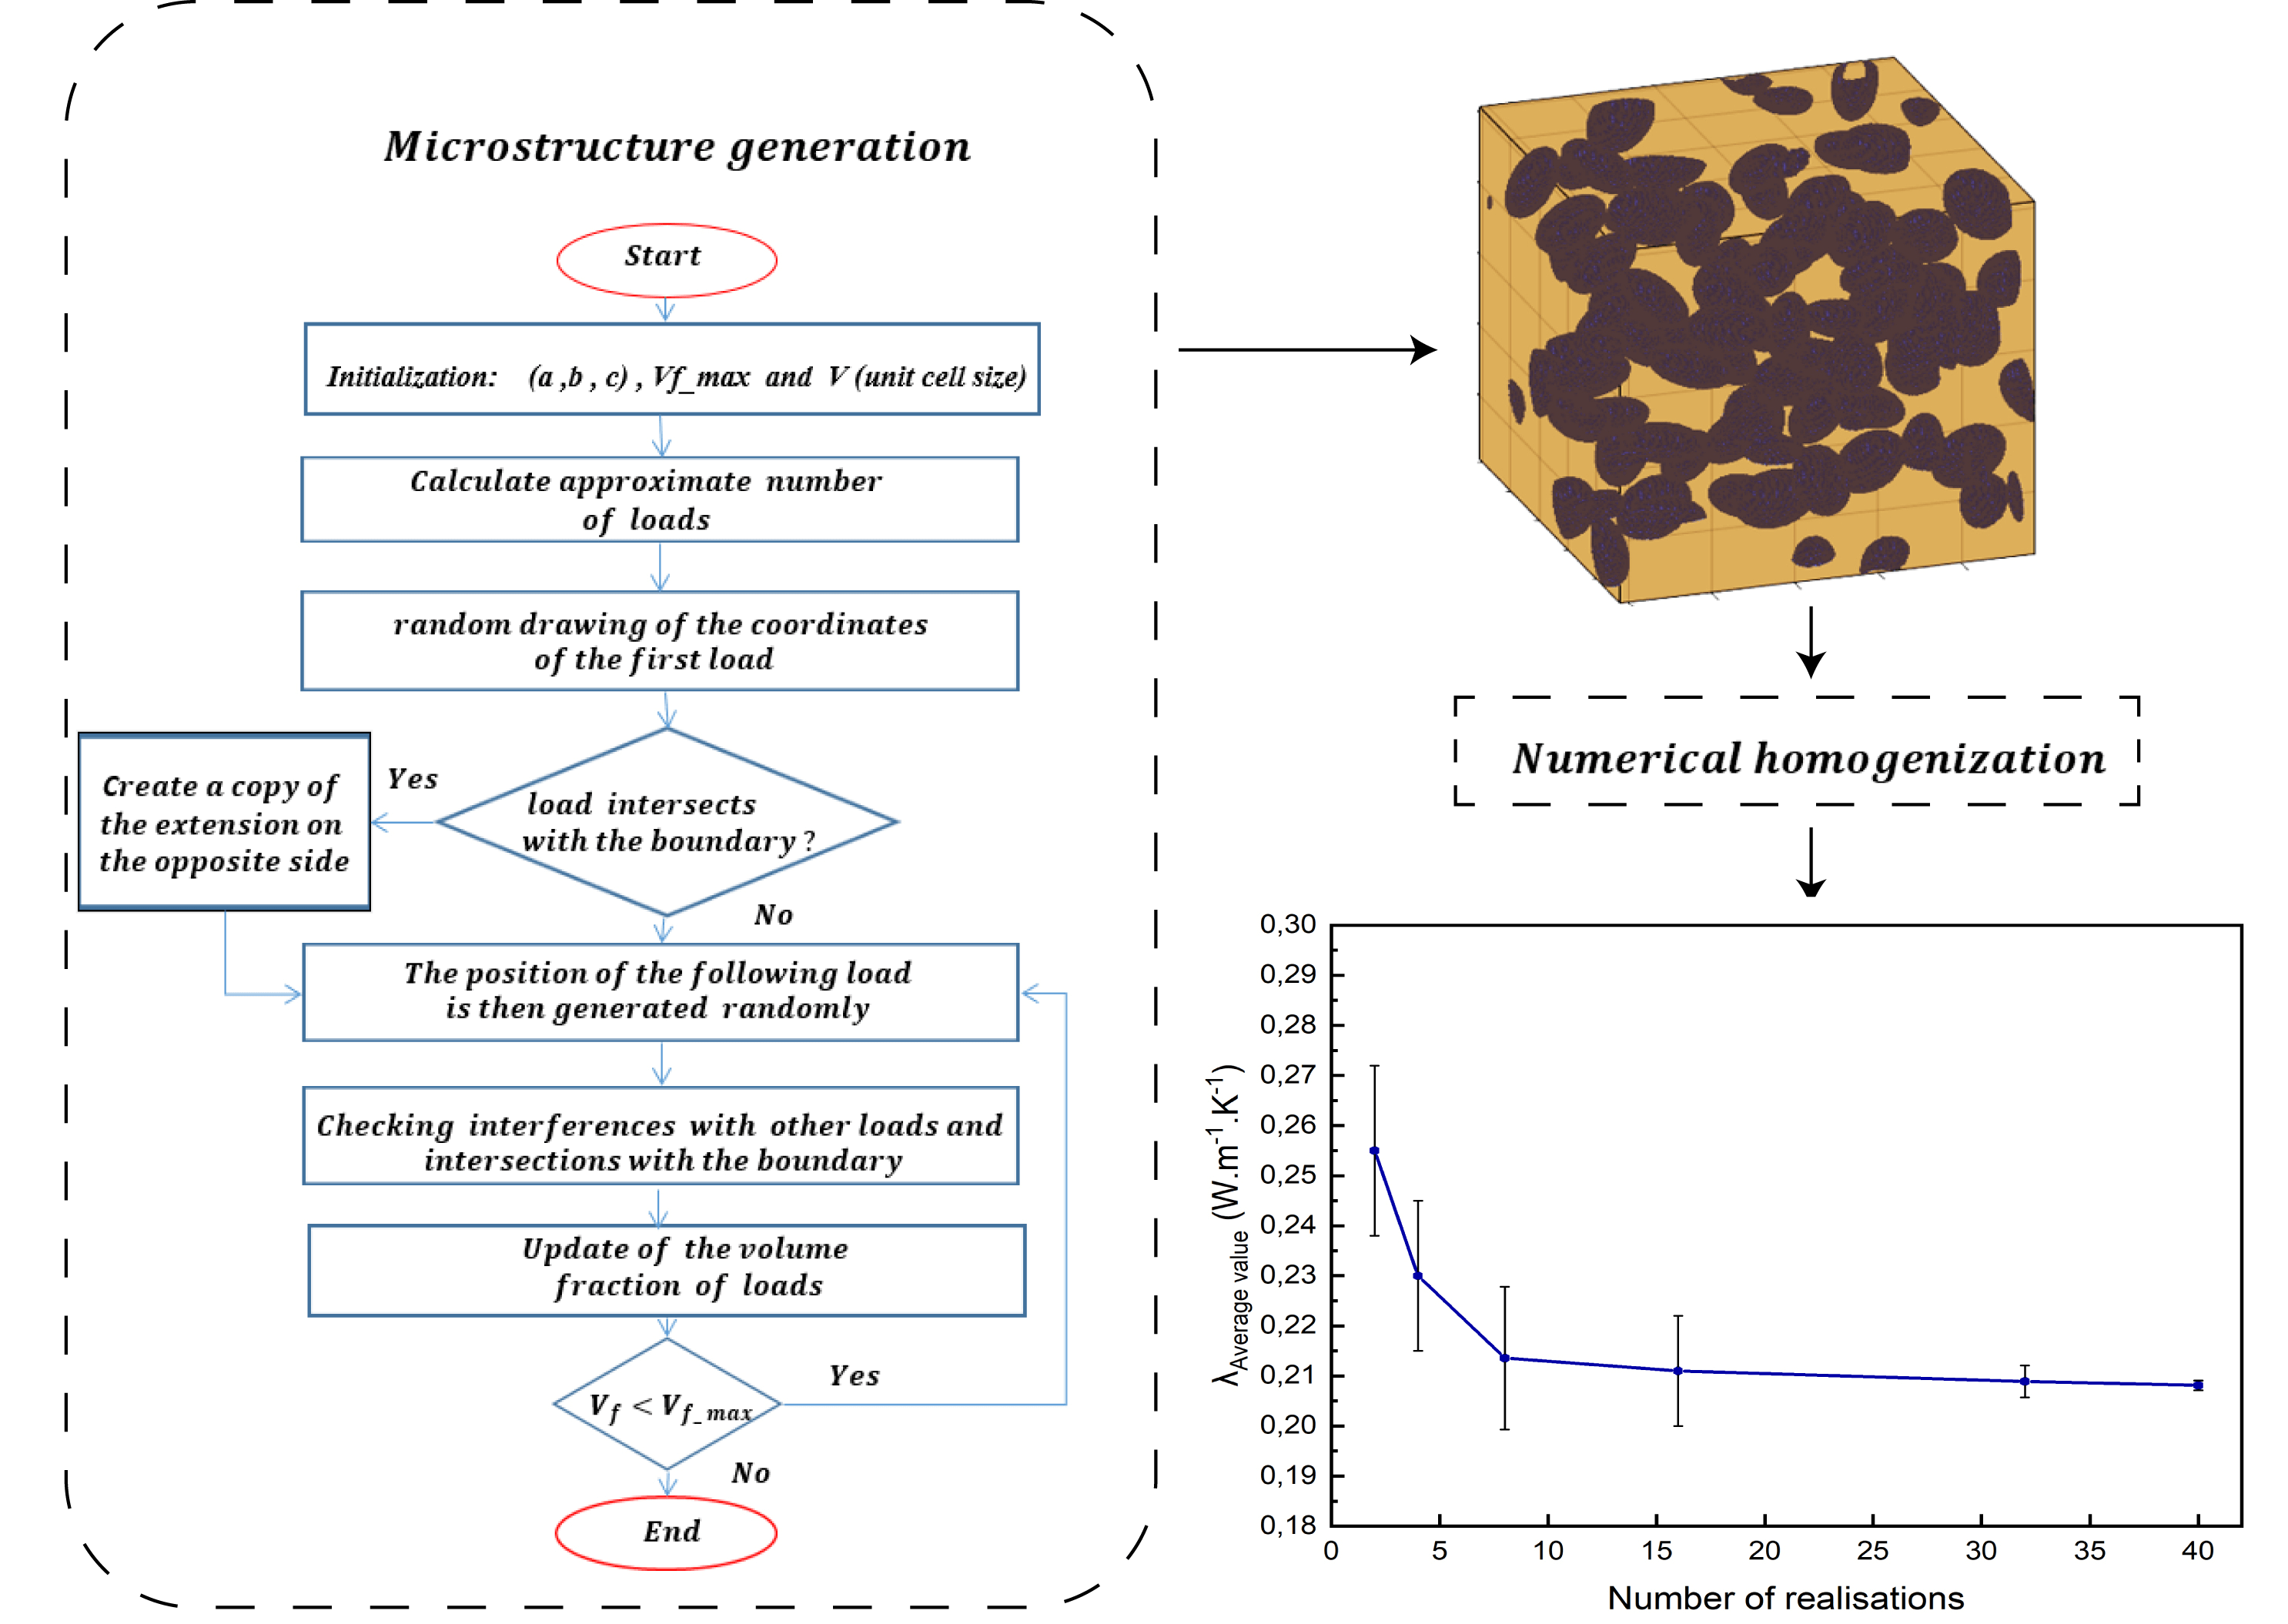 Numerical Analysis of the Thermal Properties of Ecological Materials Based on Plaster and Clay